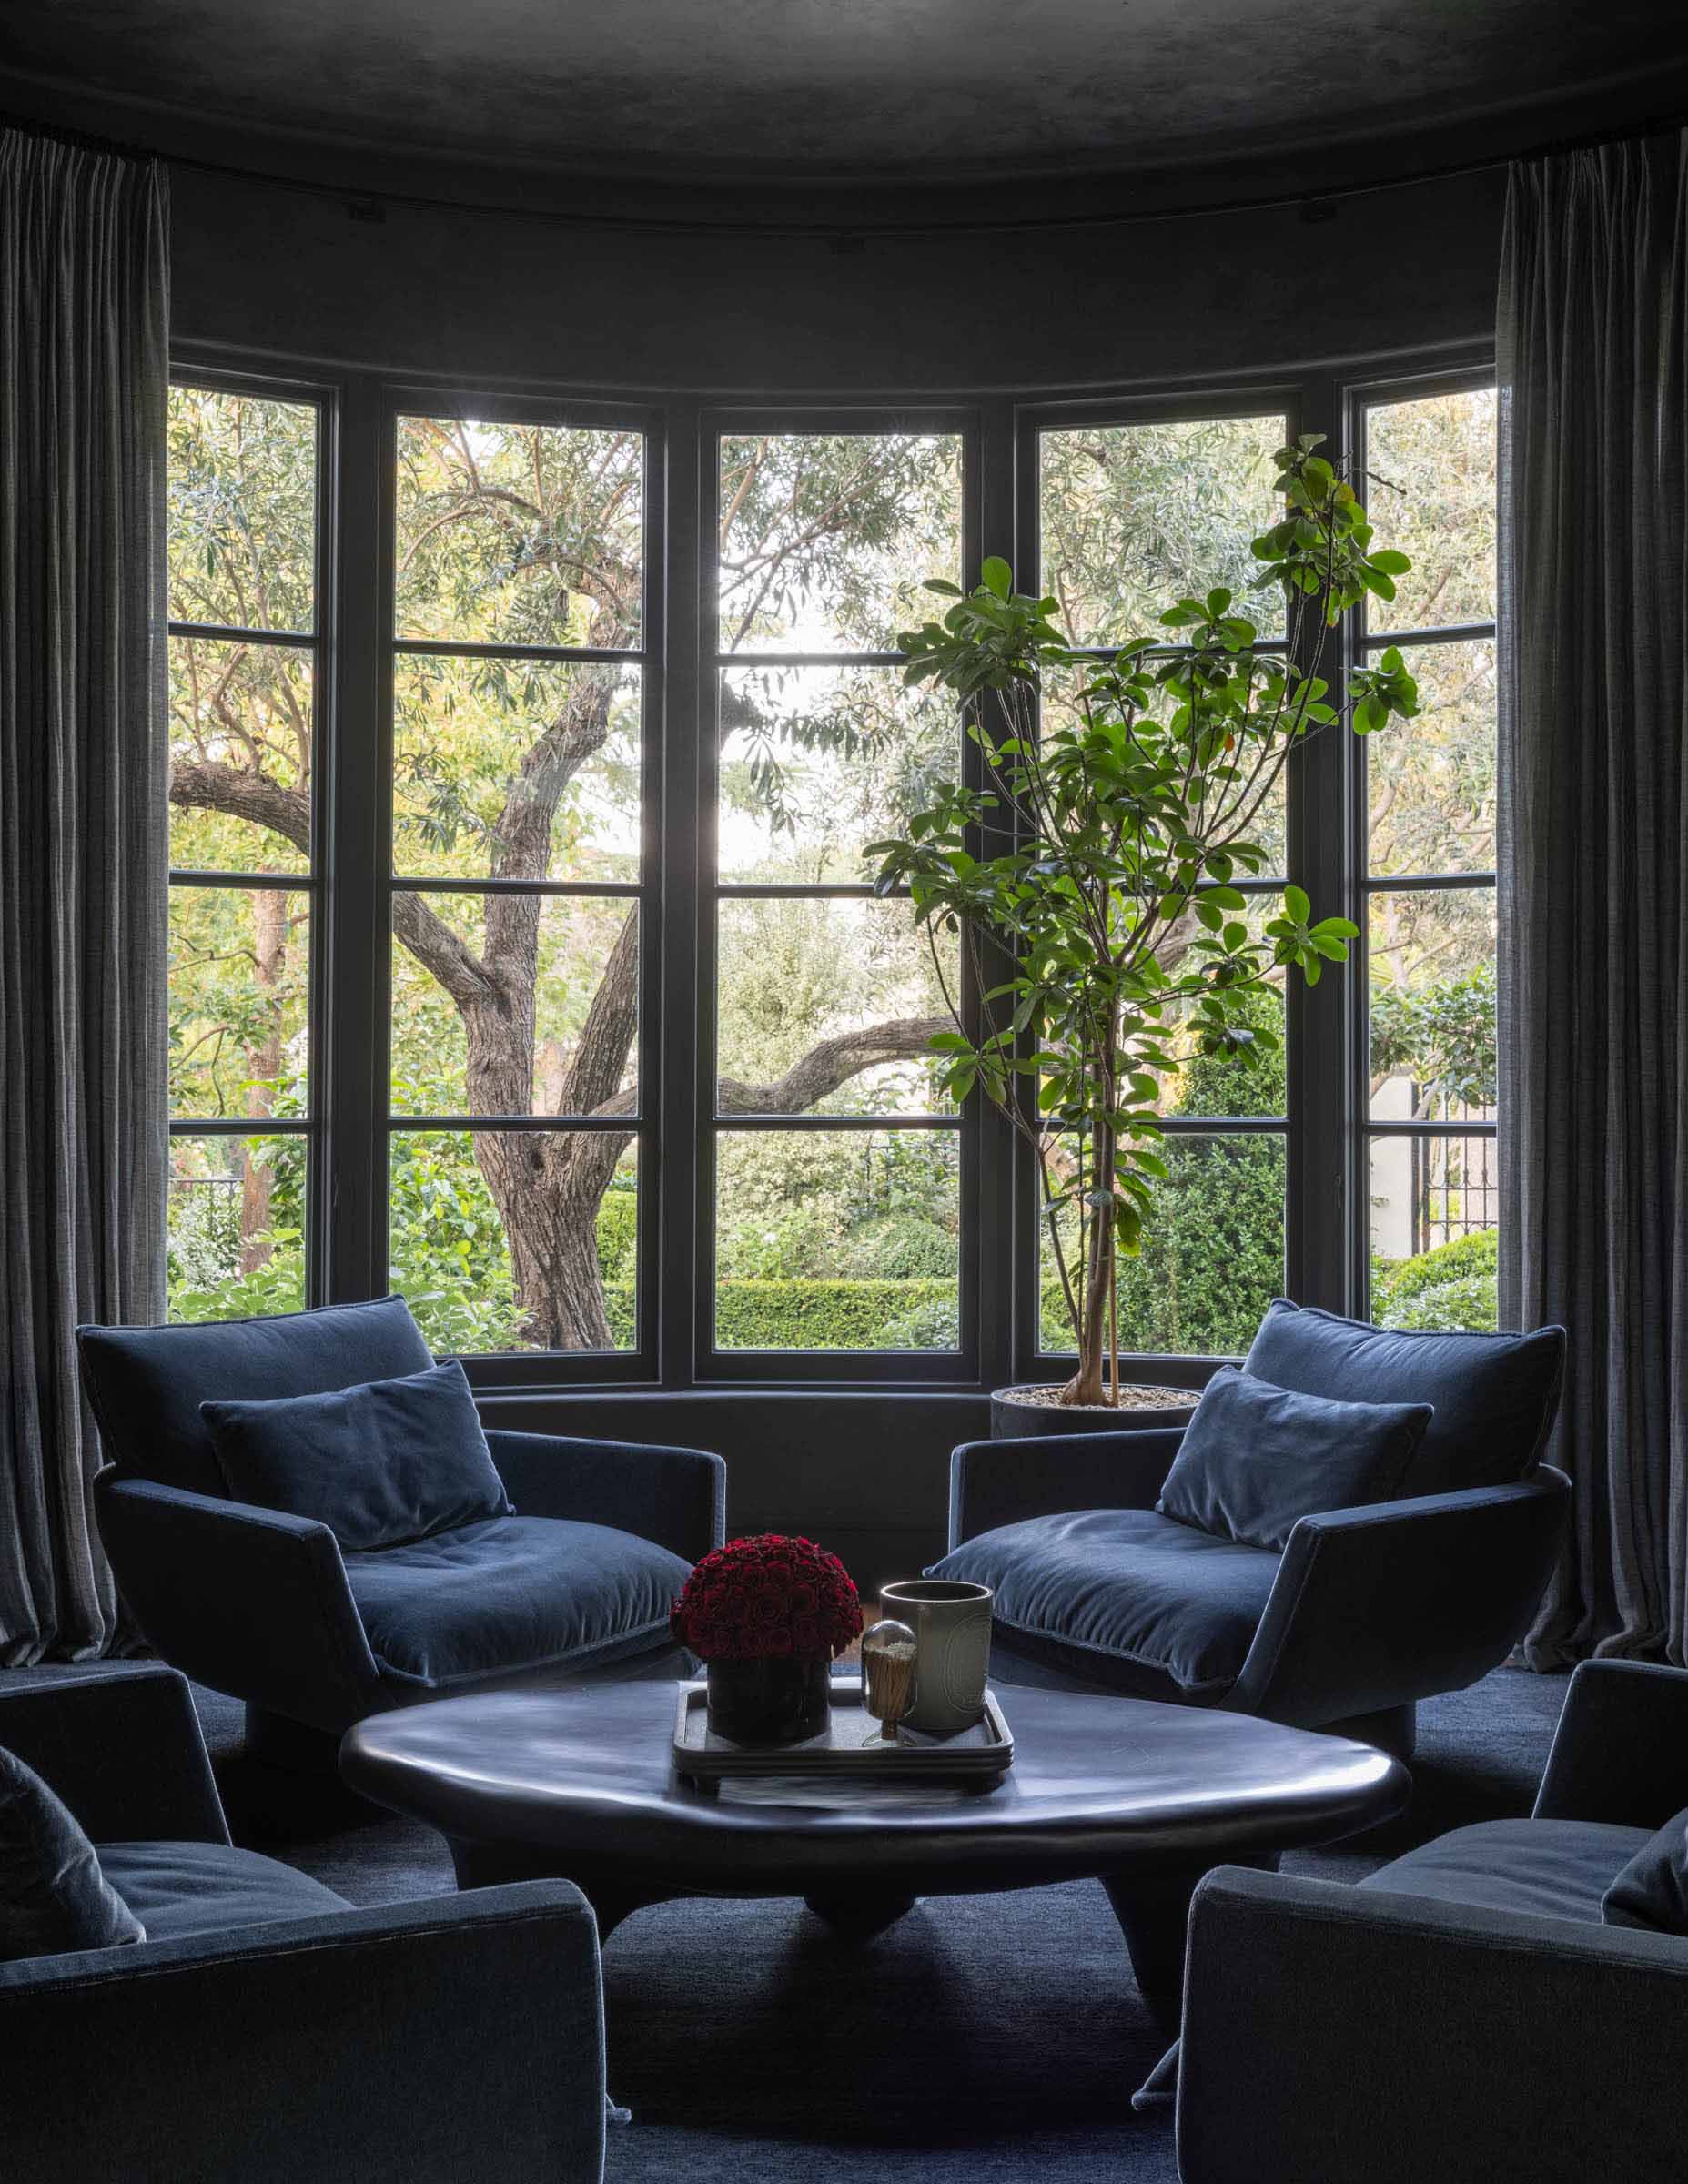 Green outdoor views out window in sitting room | Jack Haley Exterior | Eco-Luxury Landscape Architecture + Design